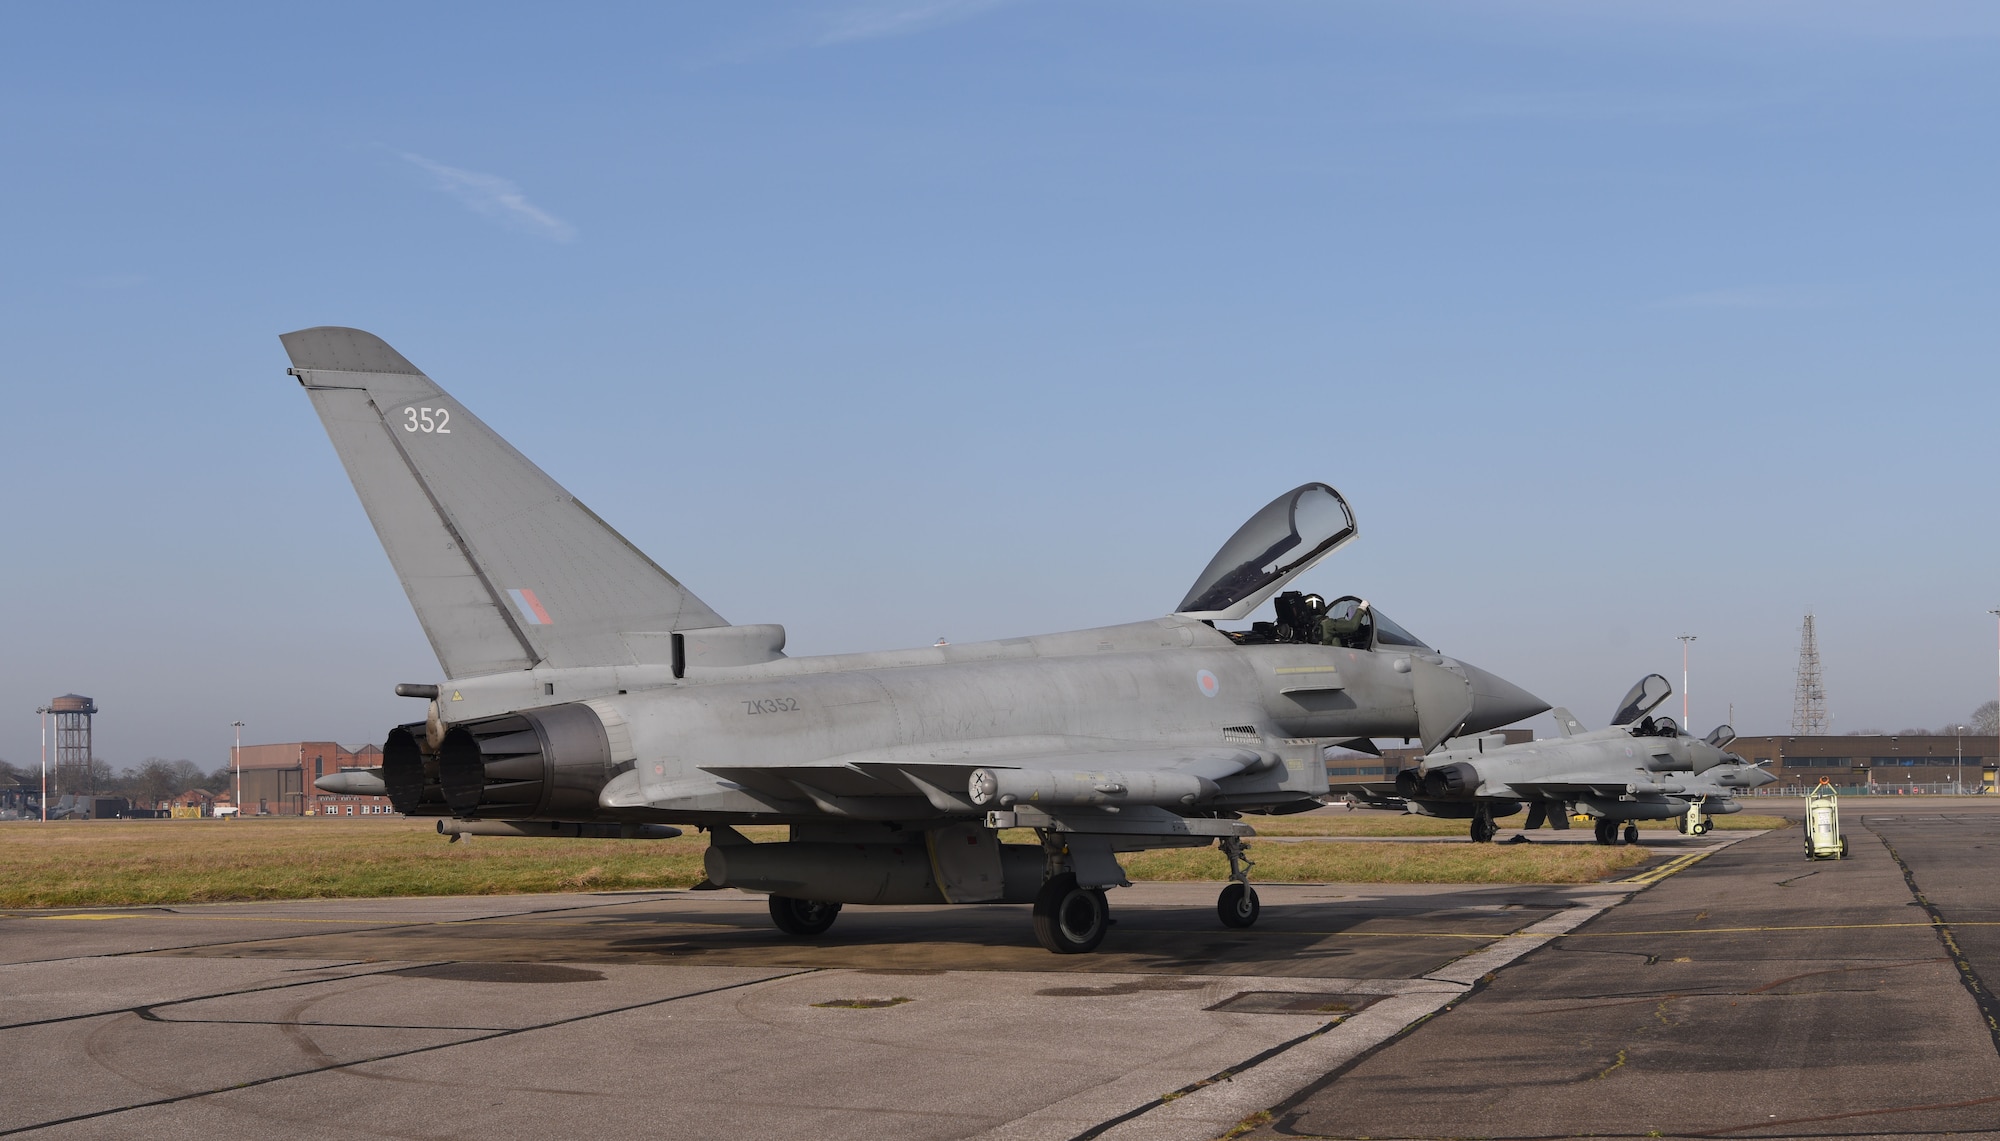 Royal Air Force Eurofighter Typhoons sit on the taxiway at Royal Air Force Mildenhall, England, Feb. 15, 2023. The aircraft, from RAF Coningsby, England, diverted here due to bad weather. The Typhoon is a highly capable and extremely agile multi-role combat aircraft, capable of being deployed for the full spectrum of air operations, including air policing, peace support and high-intensity conflict. (U.S. Air Force photo by Karen Abeyasekere)